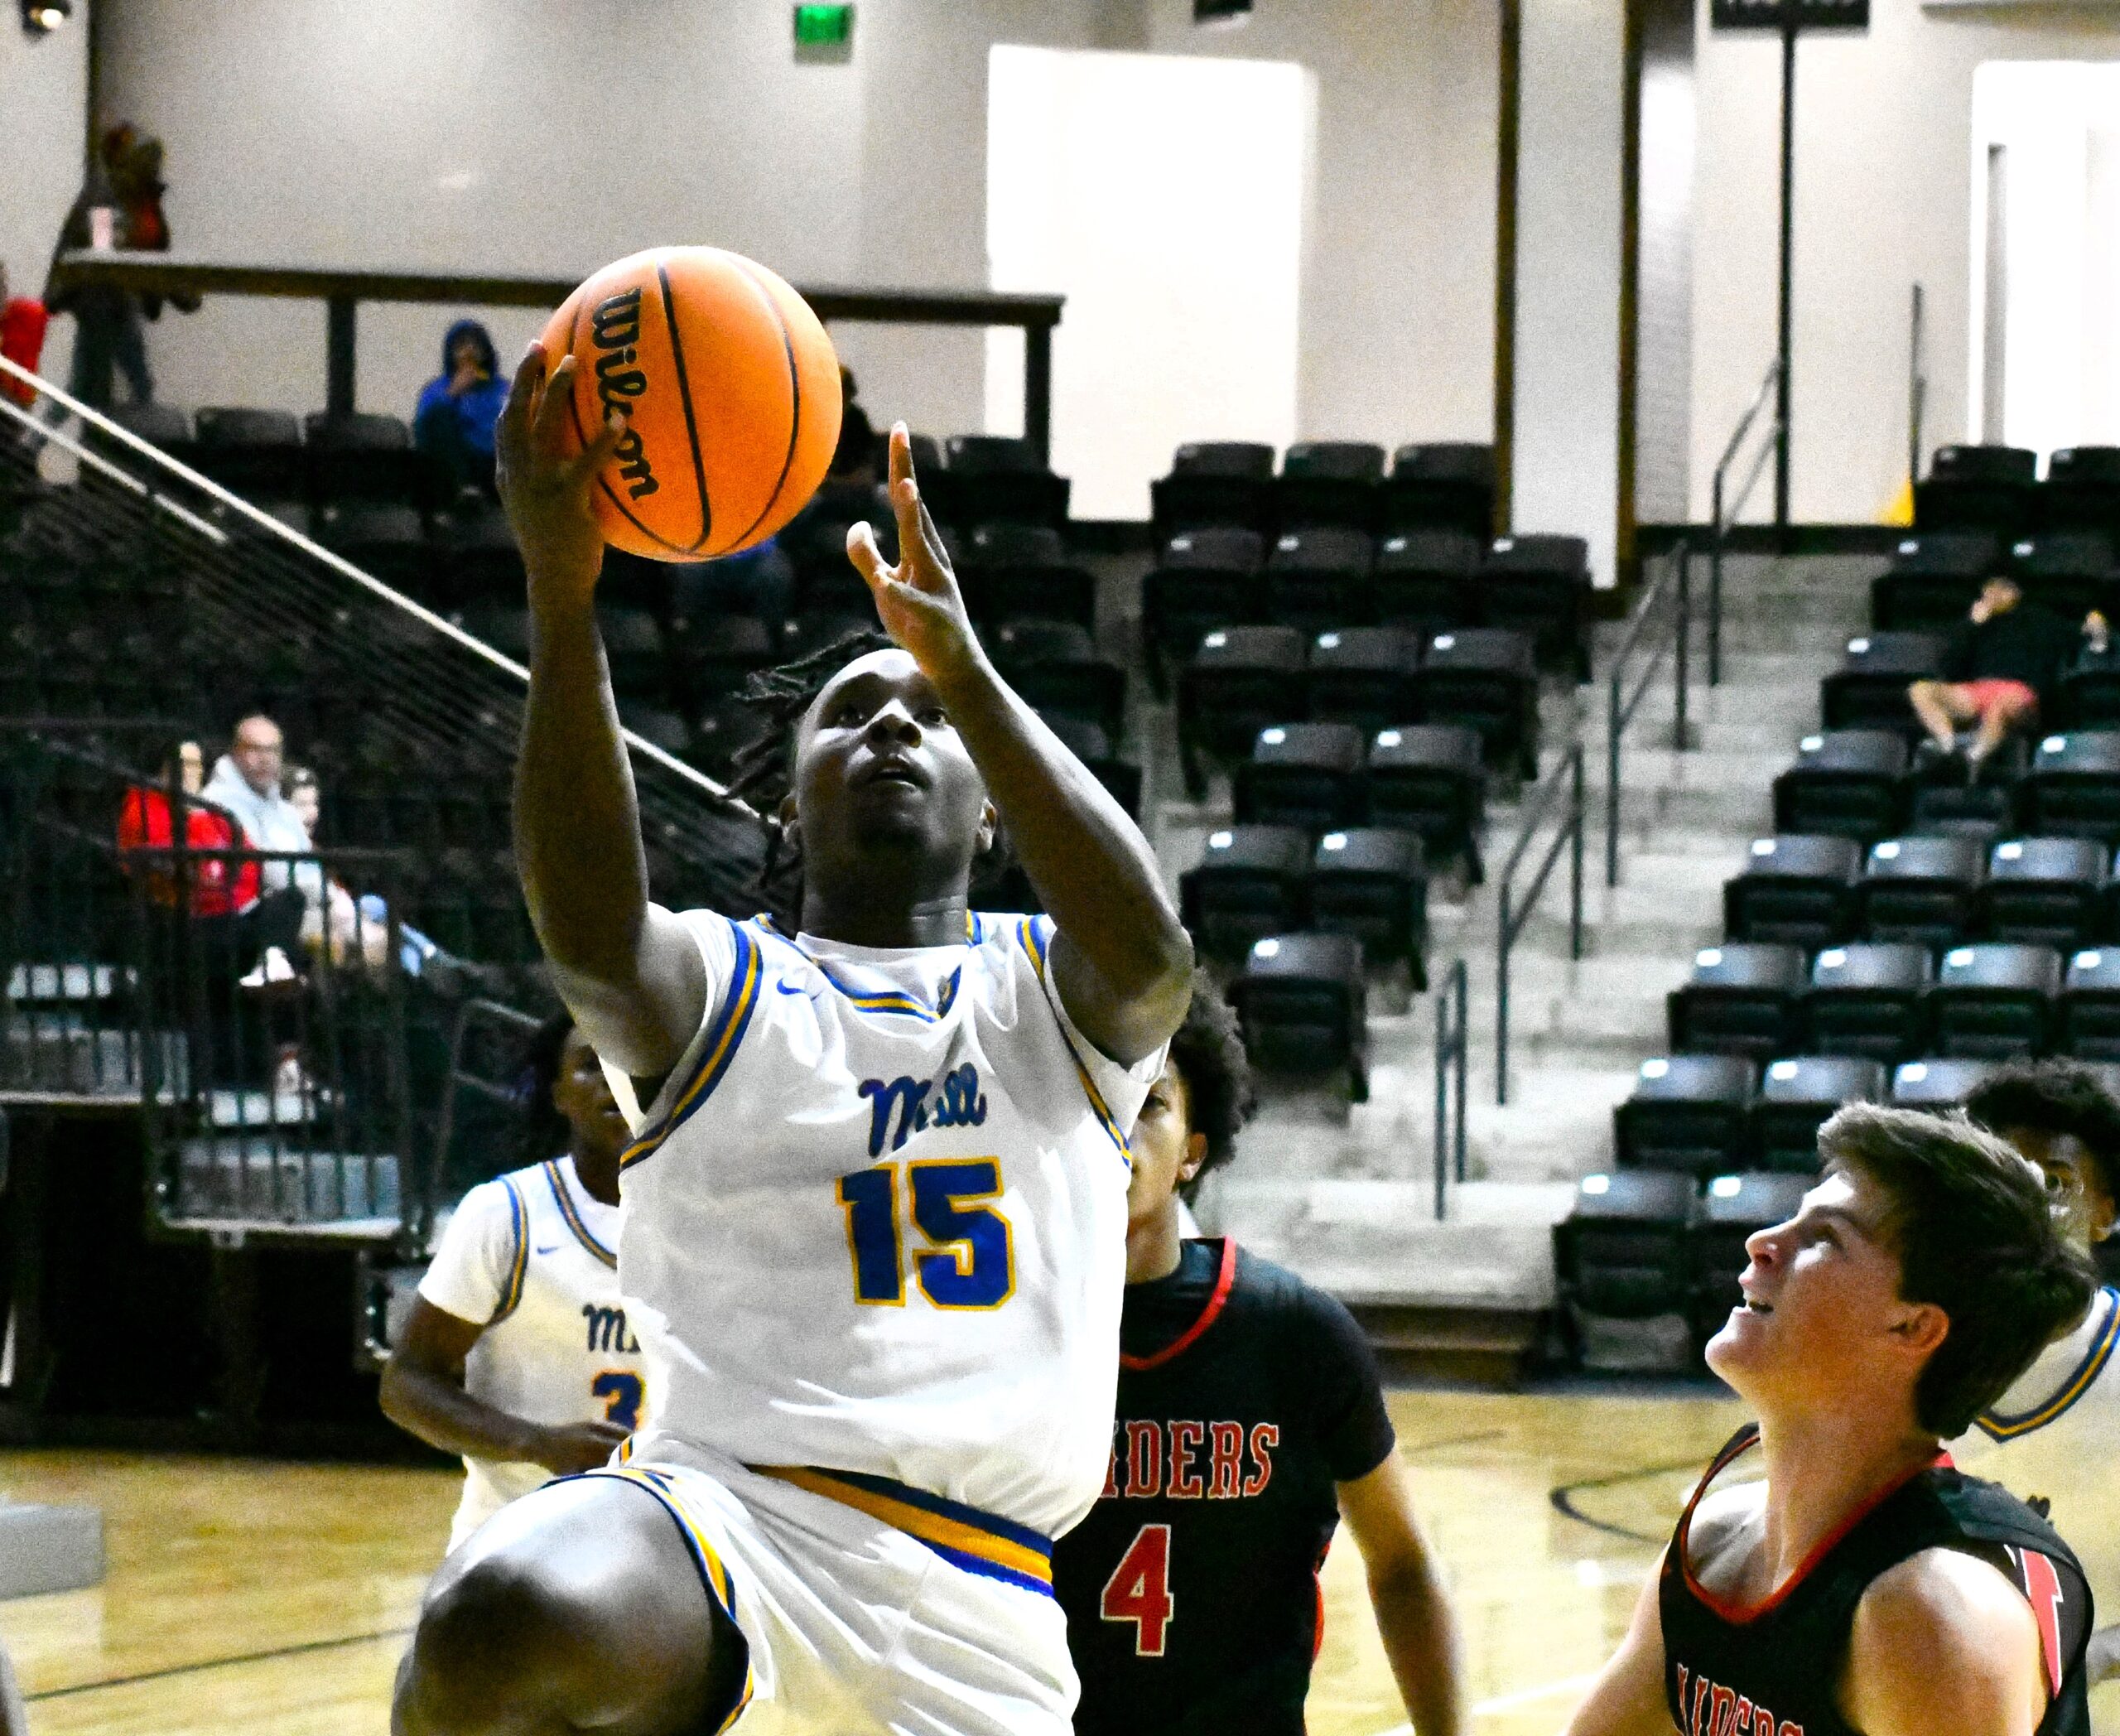 Fort Mill Basketball Teams Secure Victory at Rock Hill Sports and Events Center After Gym Mishap